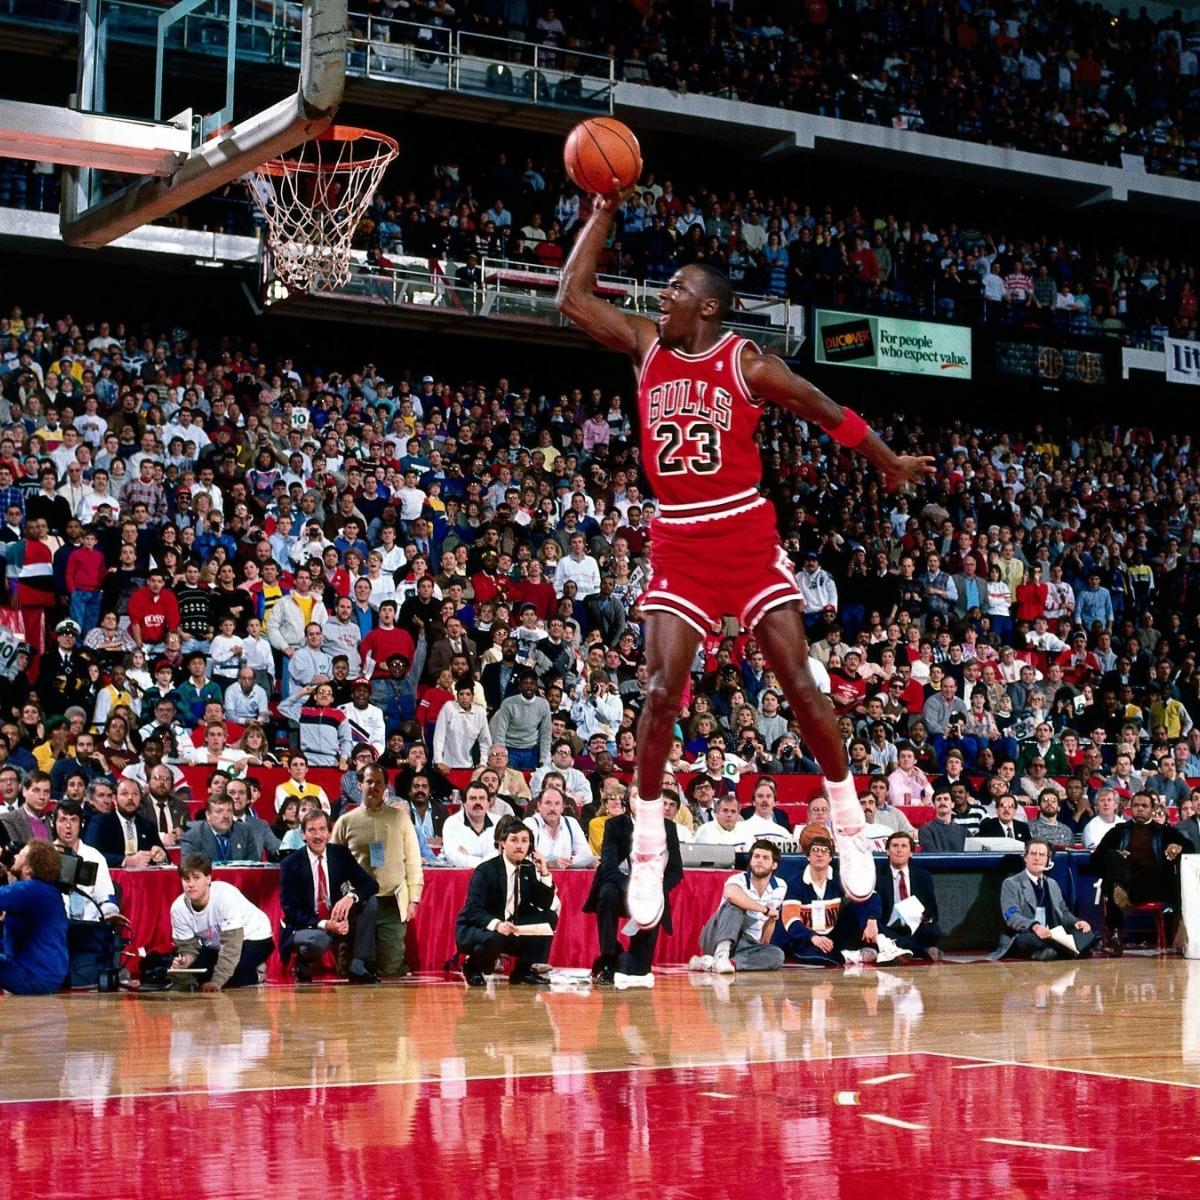 On this day in history, March 29, 1982, Michael Jordan hits